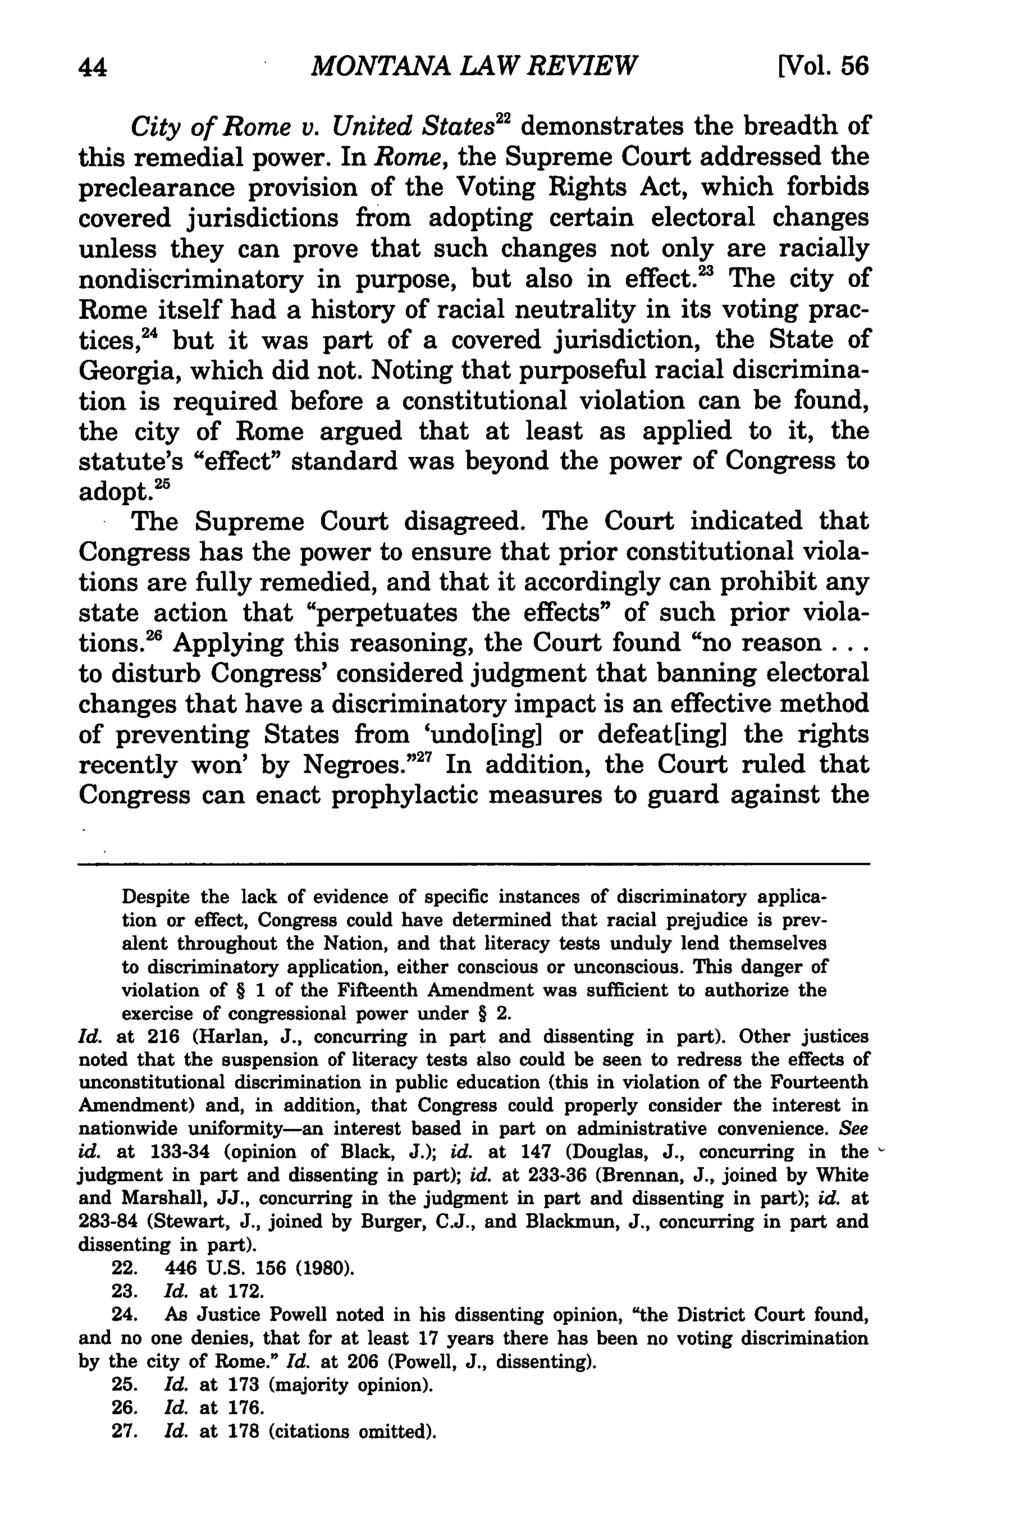 MONTANA Montana Law Review, LAW Vol. 56 REVIEW [1995], Iss. 1, Art. 3 [Vol. 56 City of Rome v. United States" demonstrates the breadth of this remedial power.